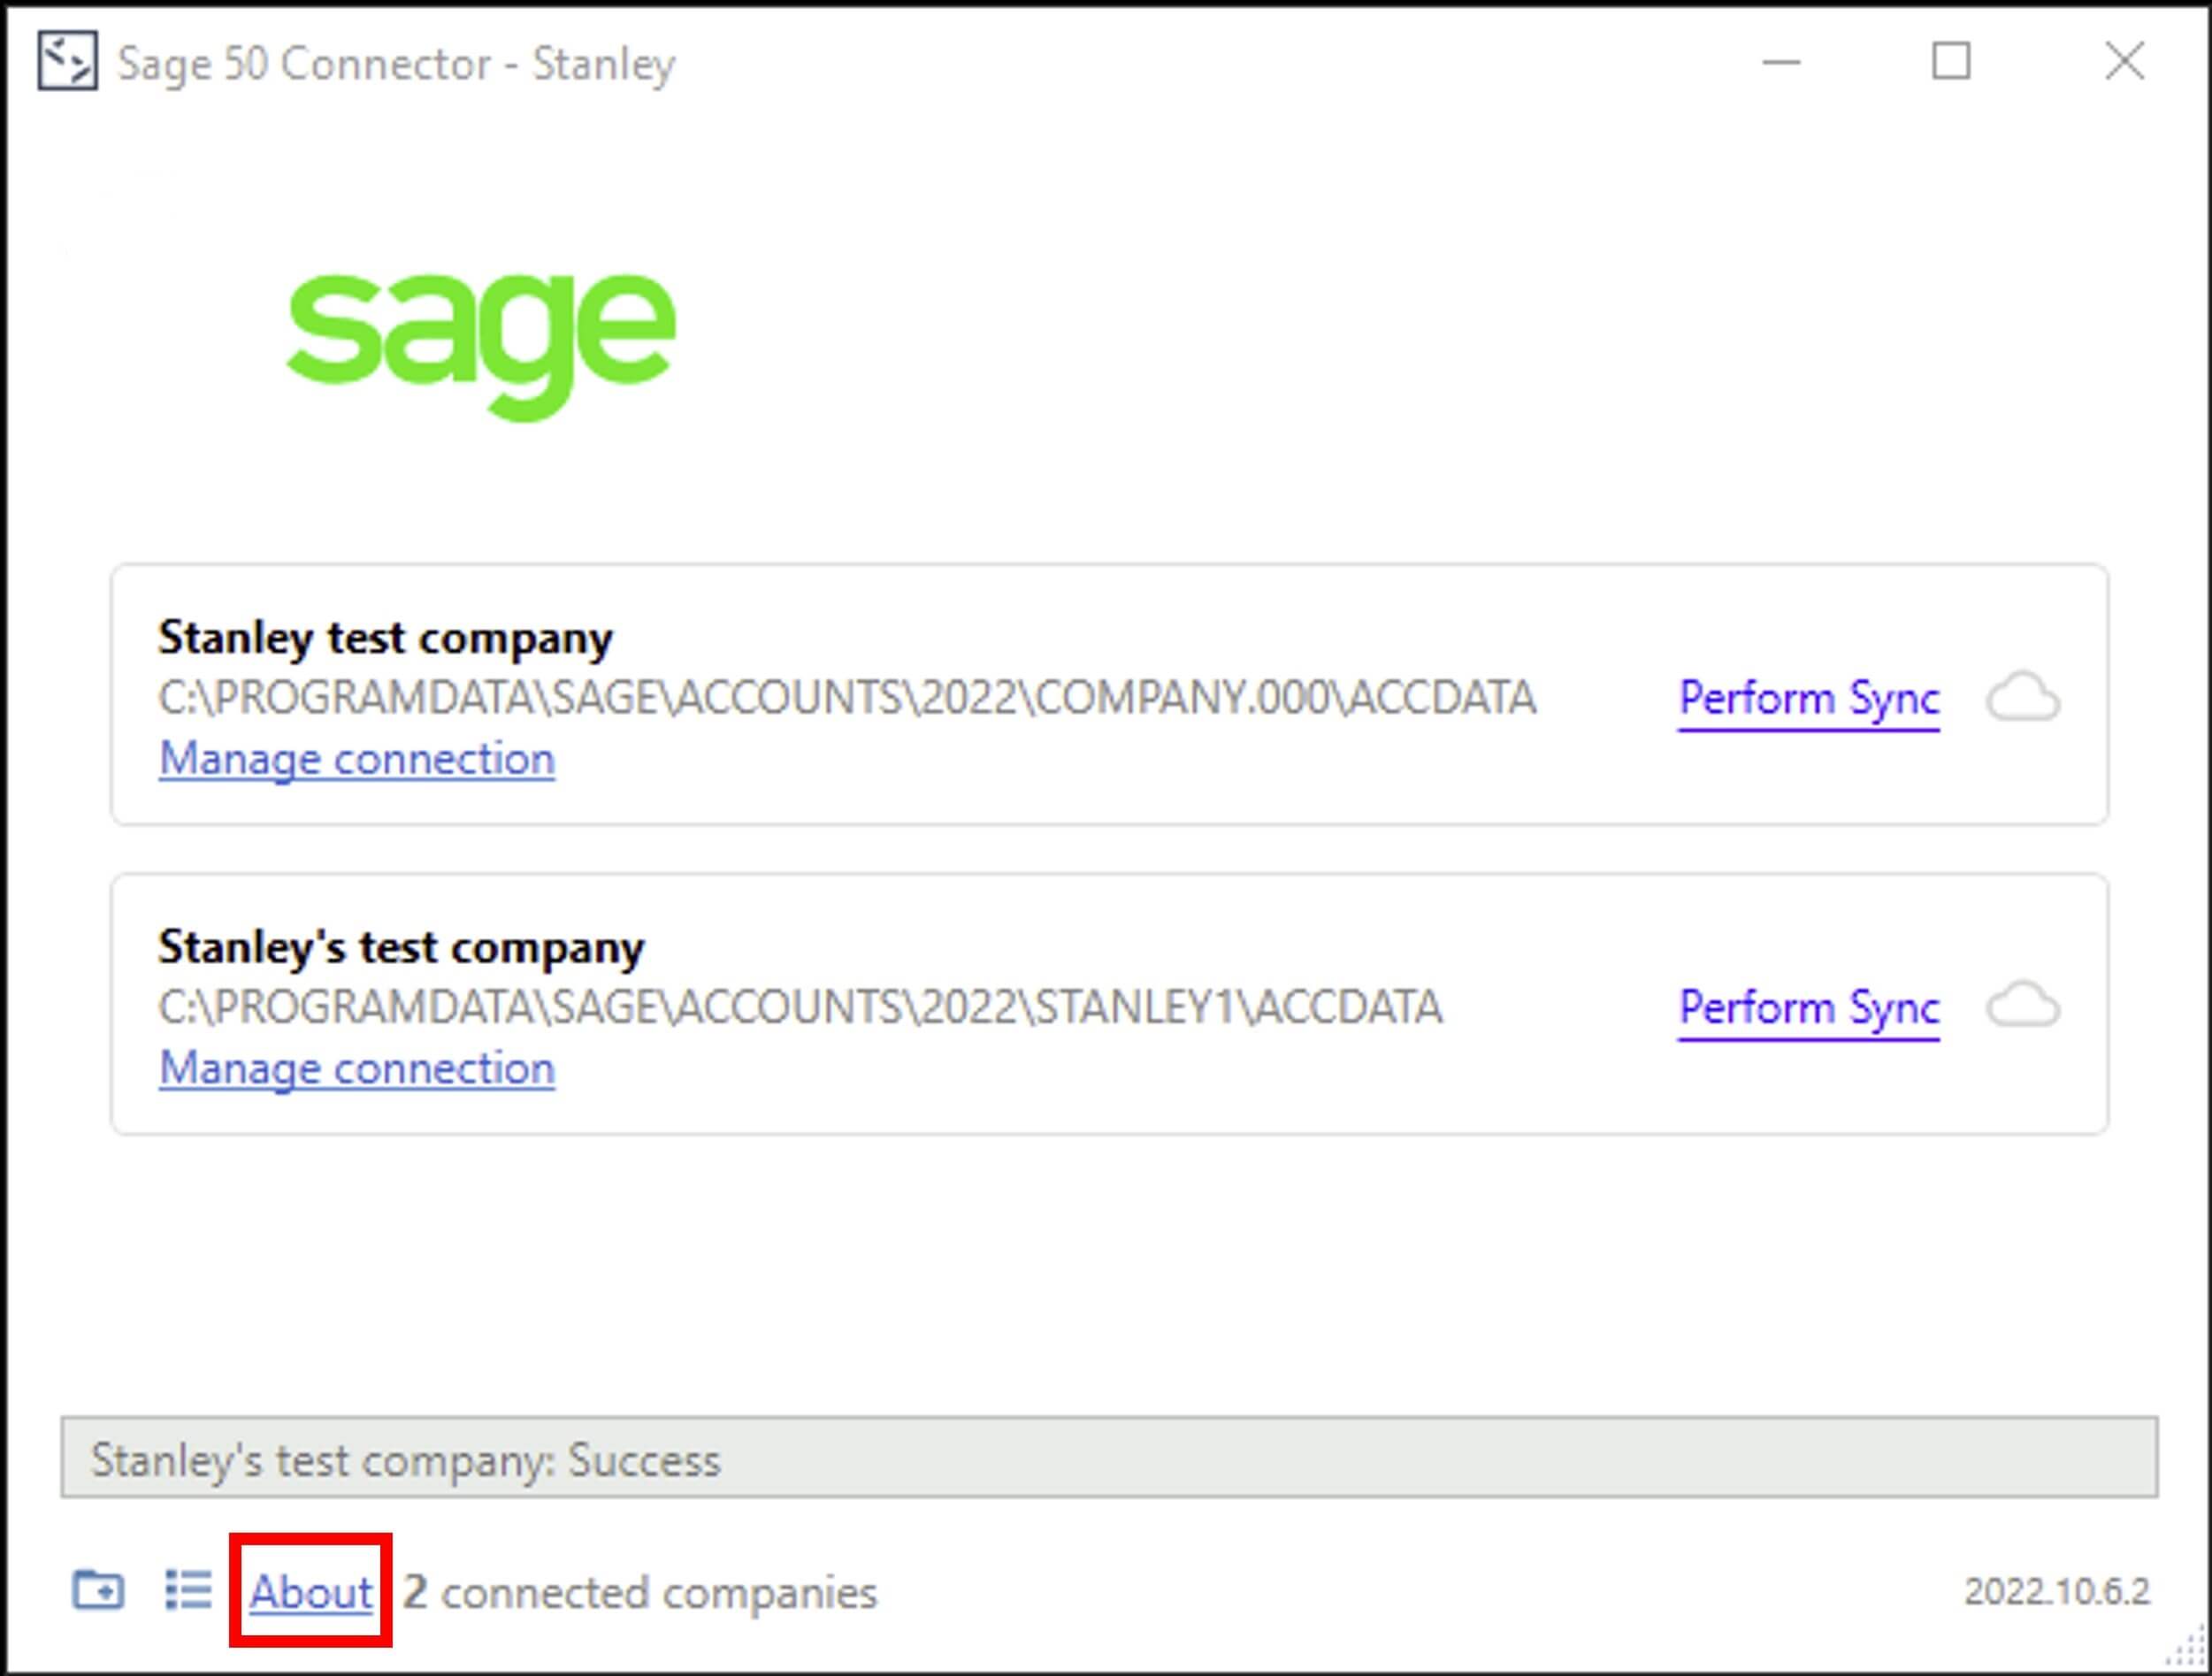 Sage 50 connector window showing the About link highlighted.